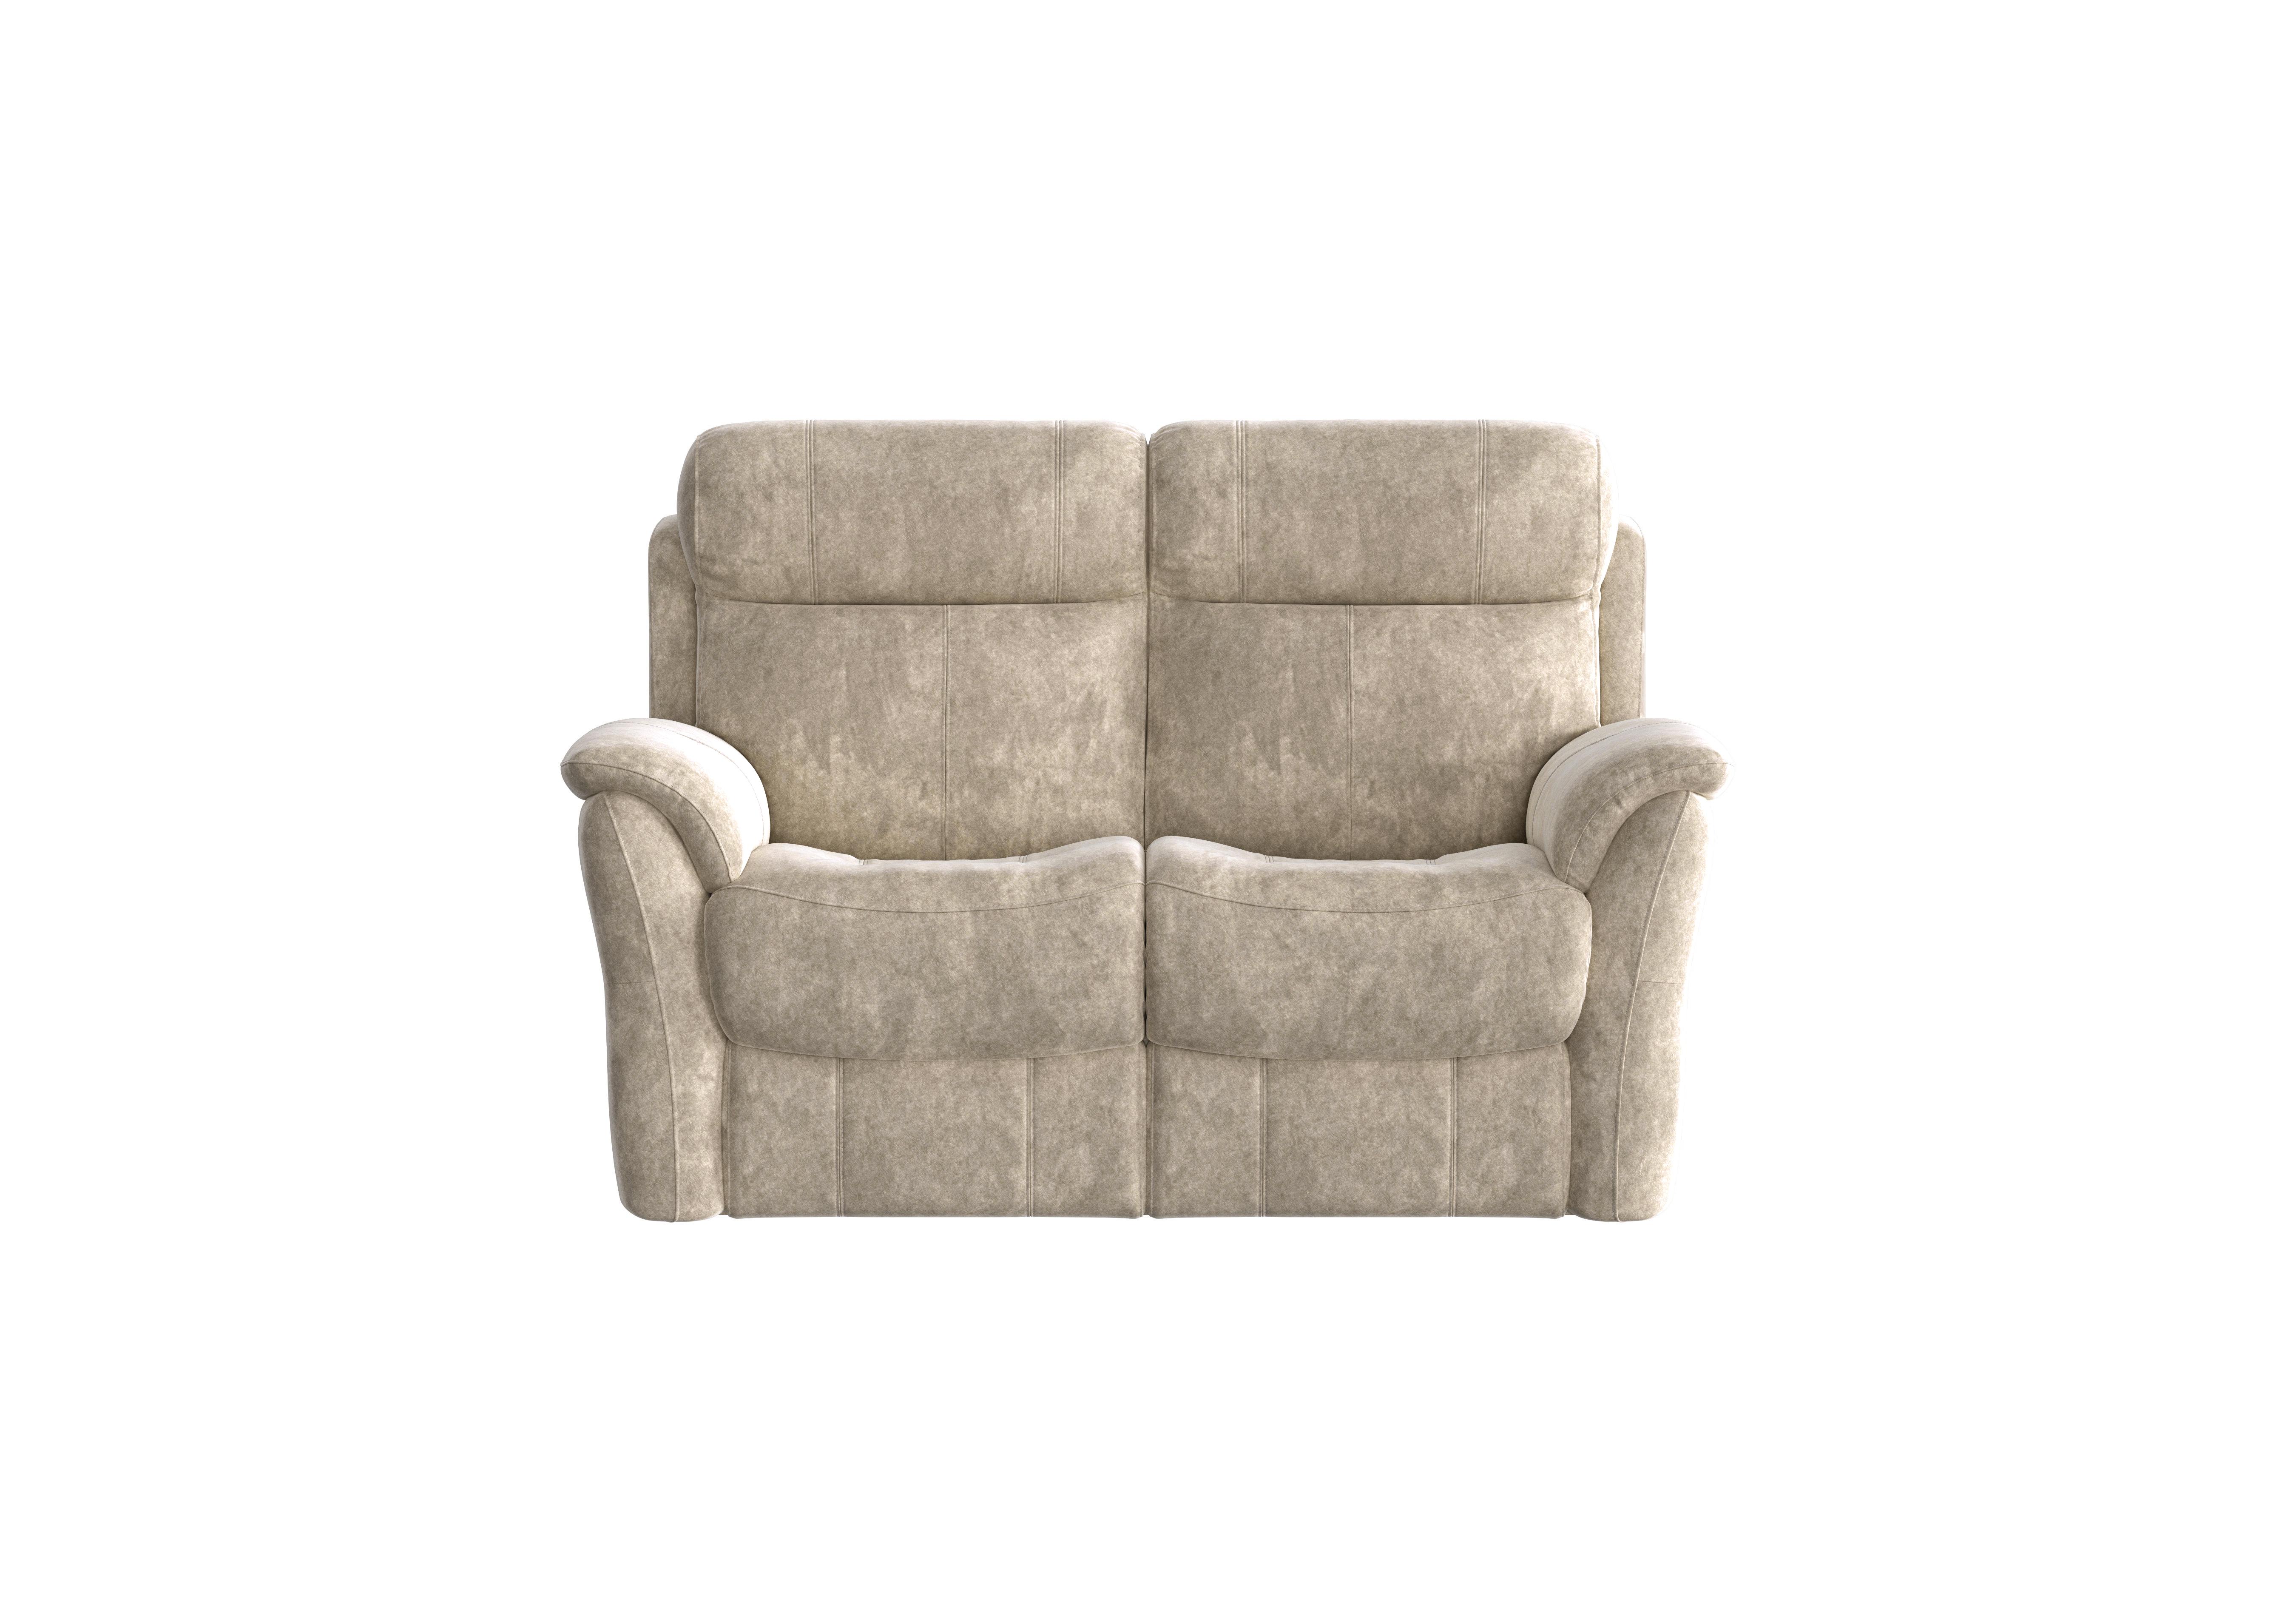 Relax Station Revive 2 Seater Fabric Sofa in Bfa-Bnn-R26 Fv2 Cream on Furniture Village